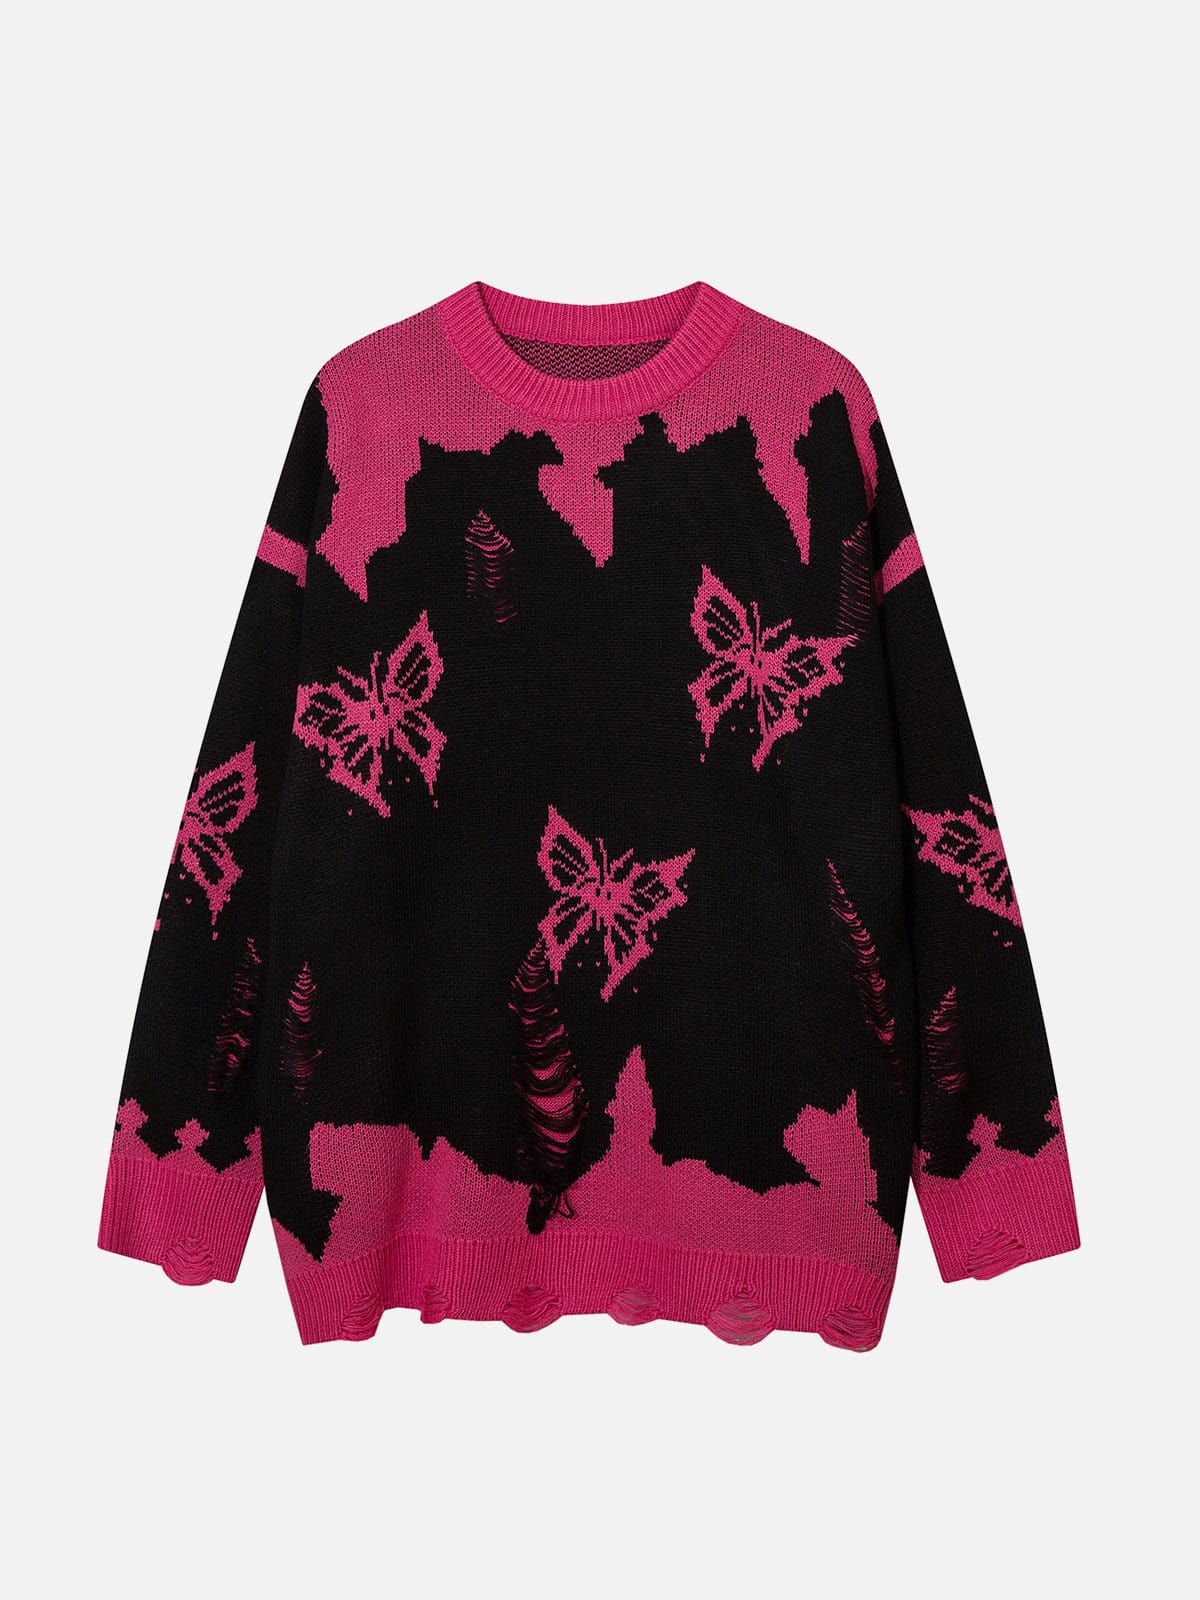 NEV Butterfly Jacquard Distressed Sweater